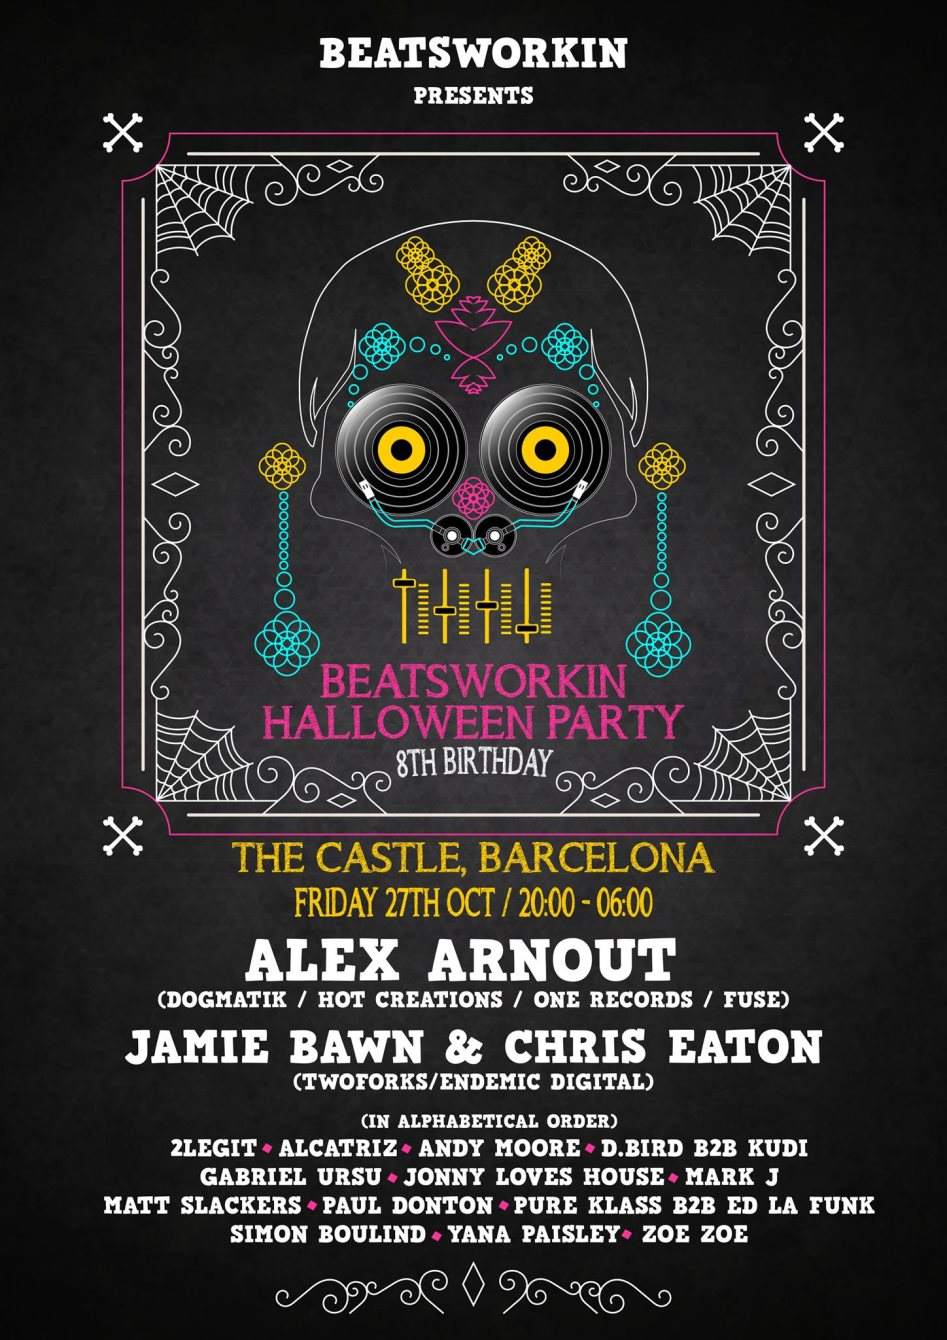 Beatsworkin Halloween Party & 8th Birthday with Alex Arnout at The Secret Castle - Página frontal